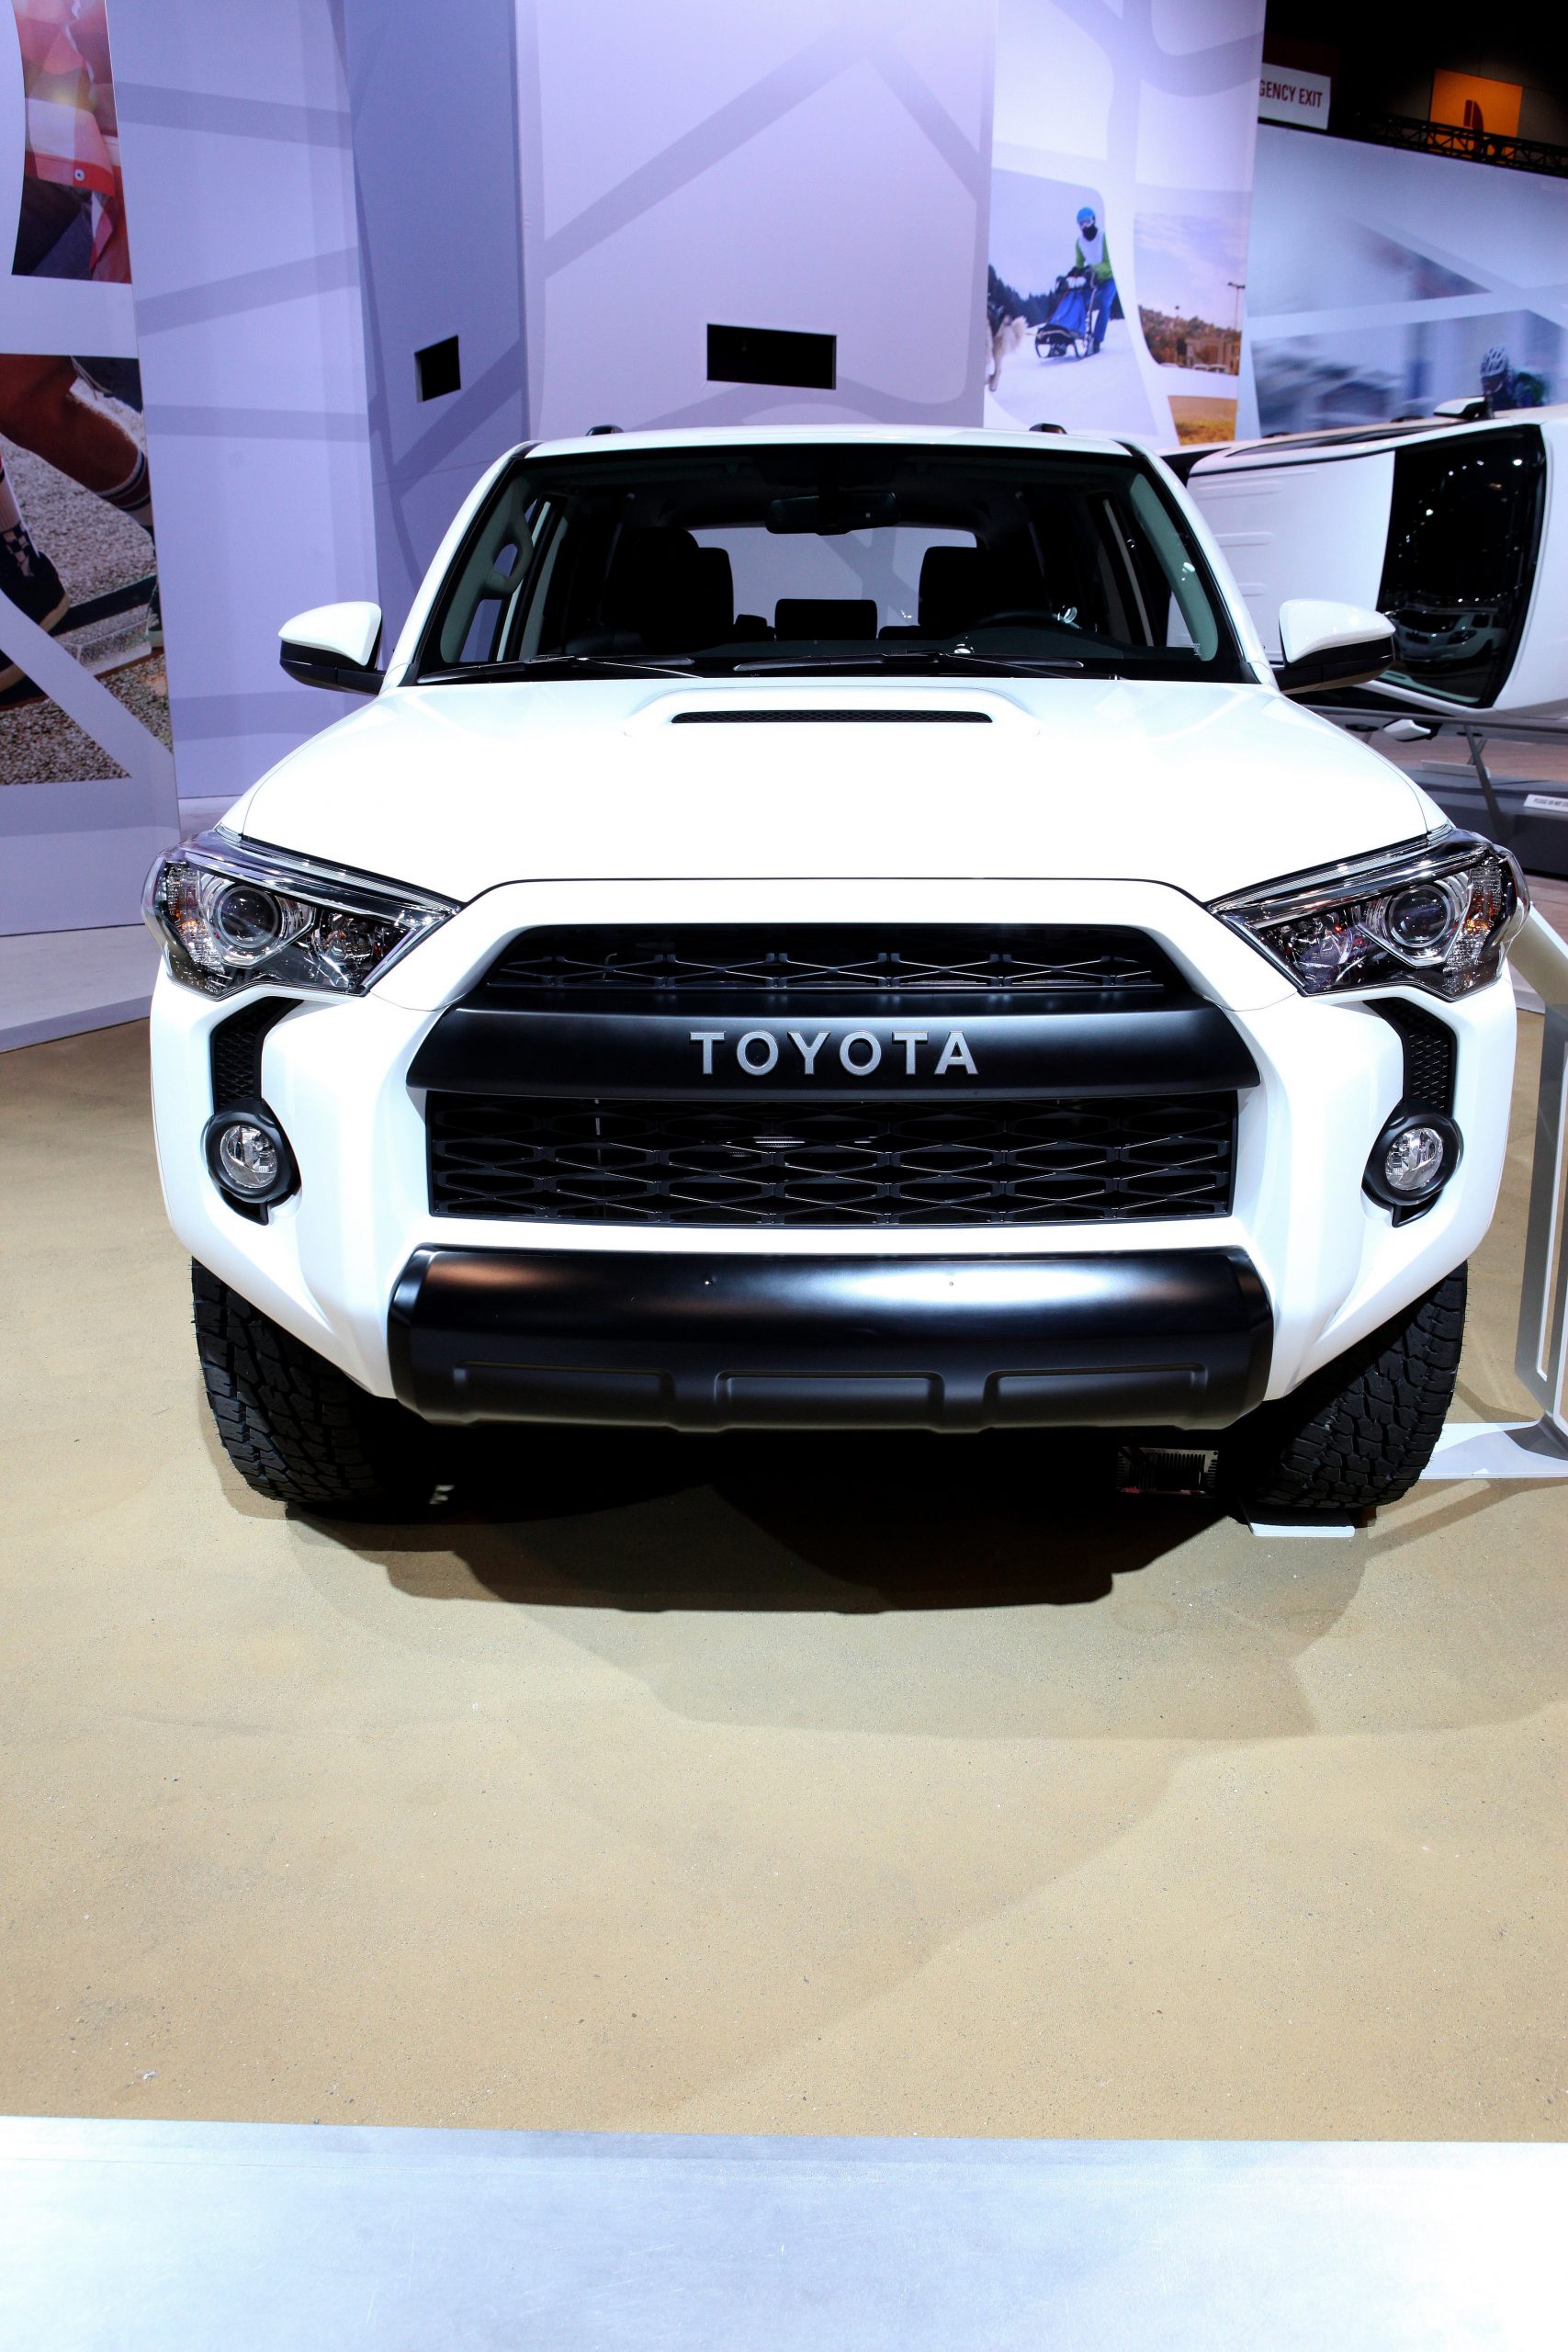 a 2017 Toyota 4Runner TRD Pro on Display at an indoor auto show